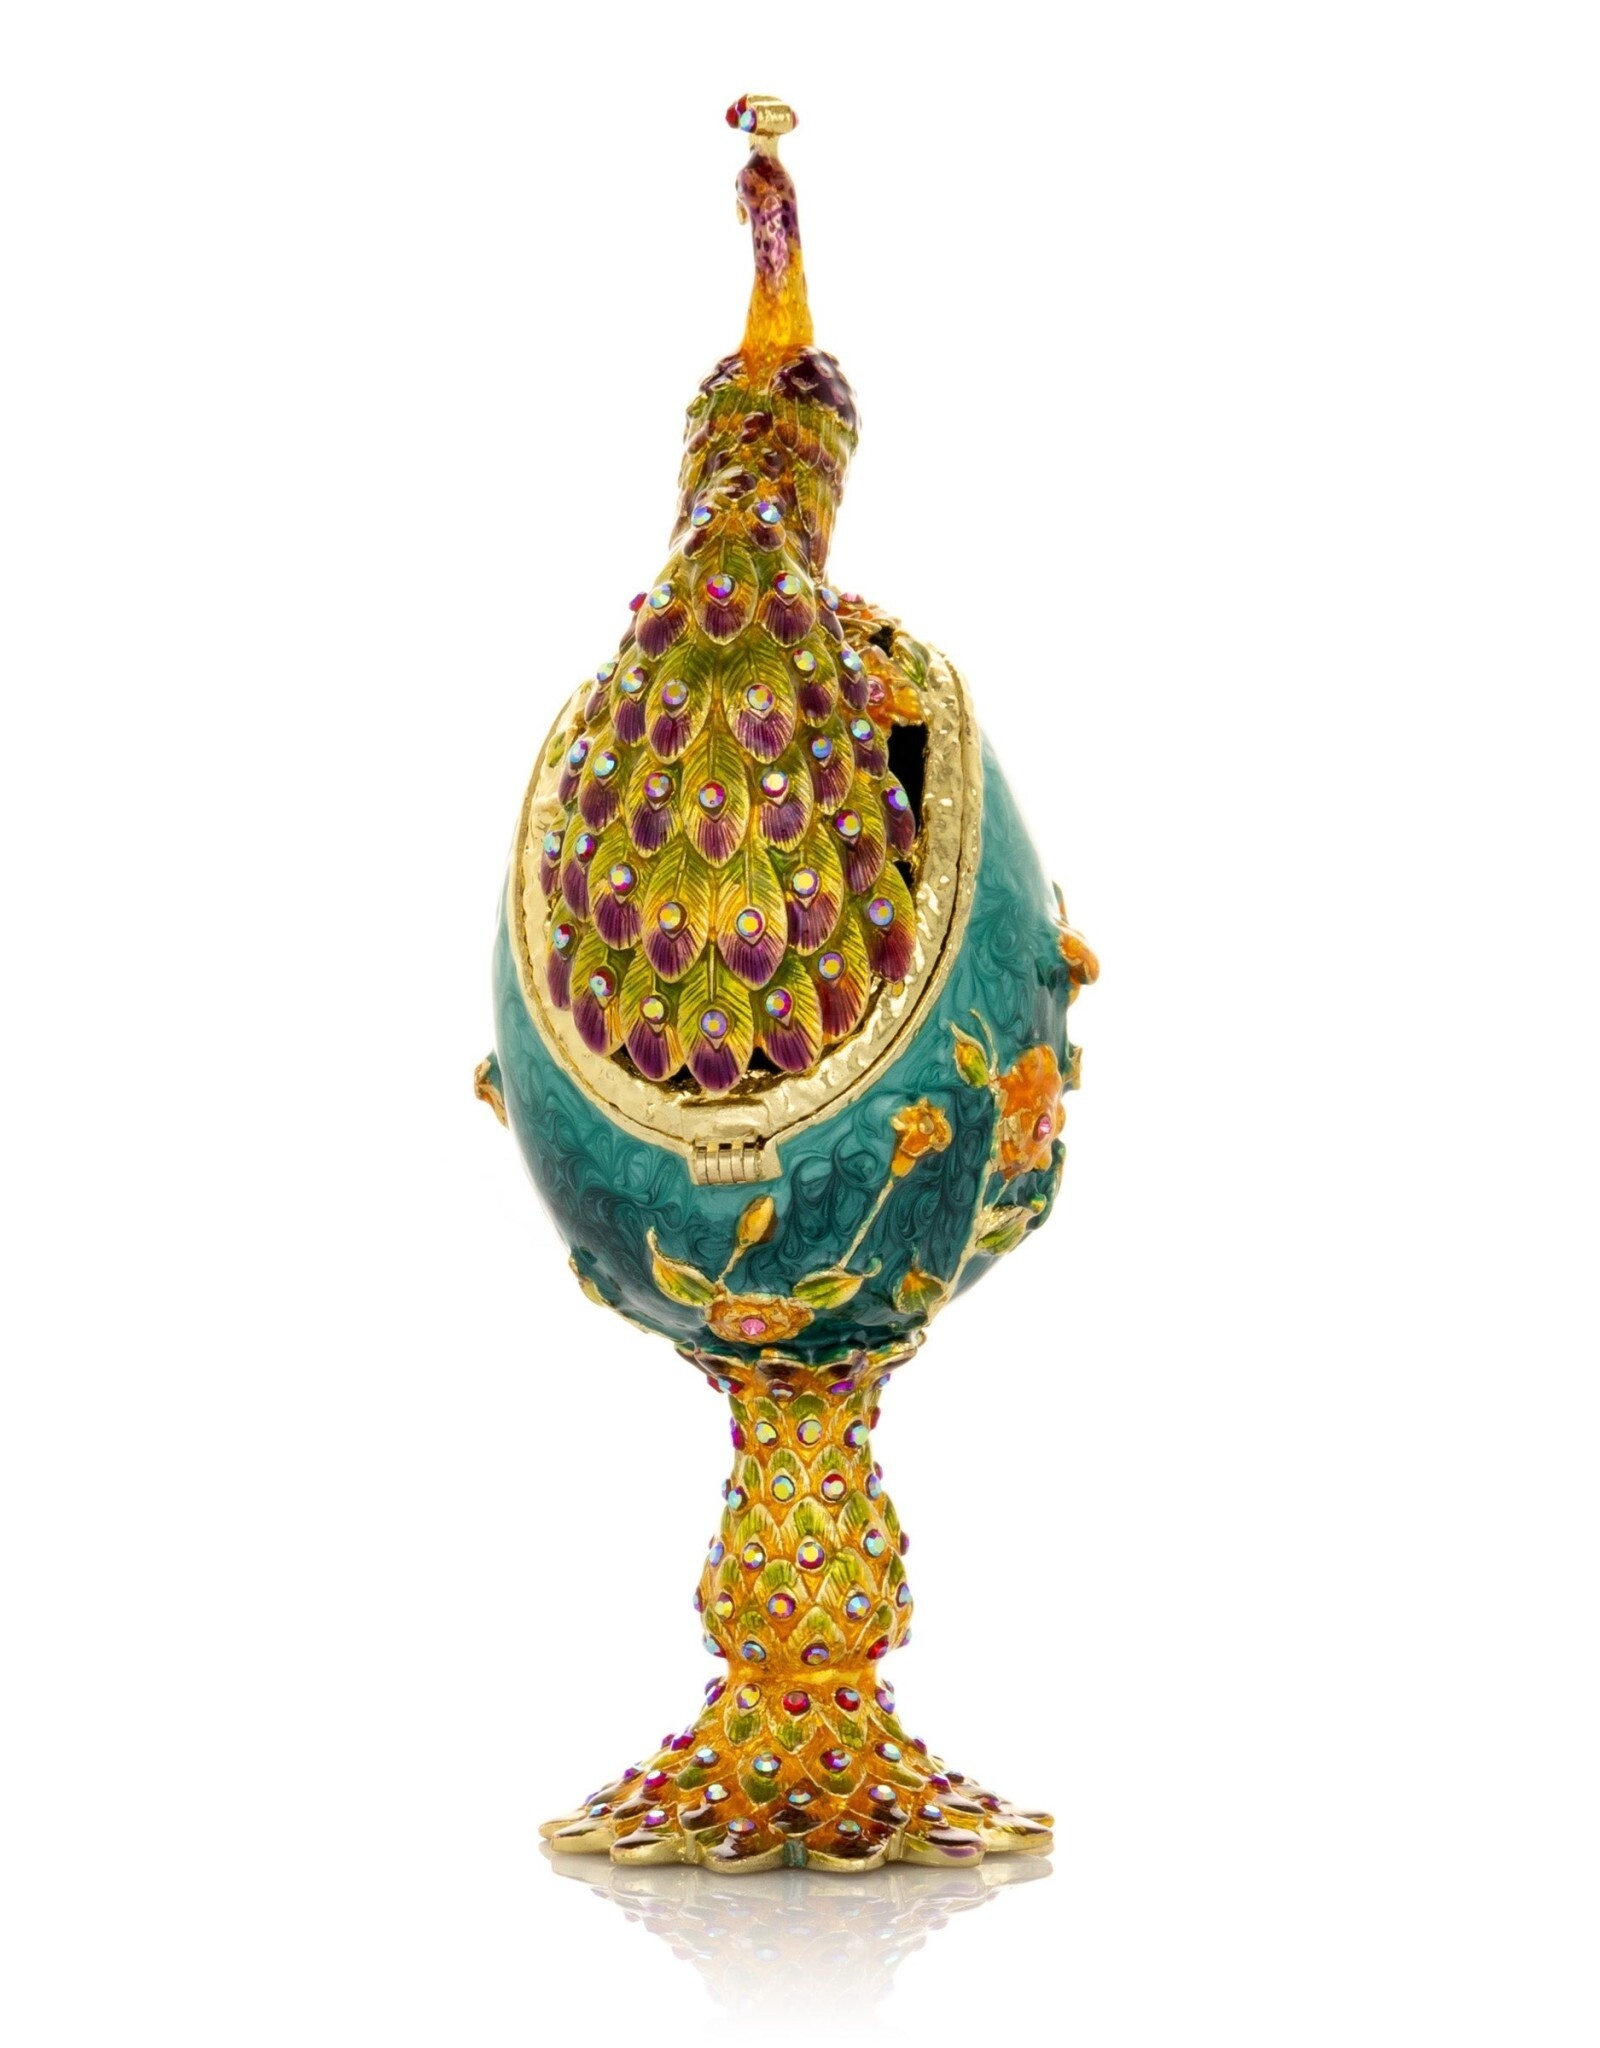 Faberge Inspired Peacock Imperial Egg